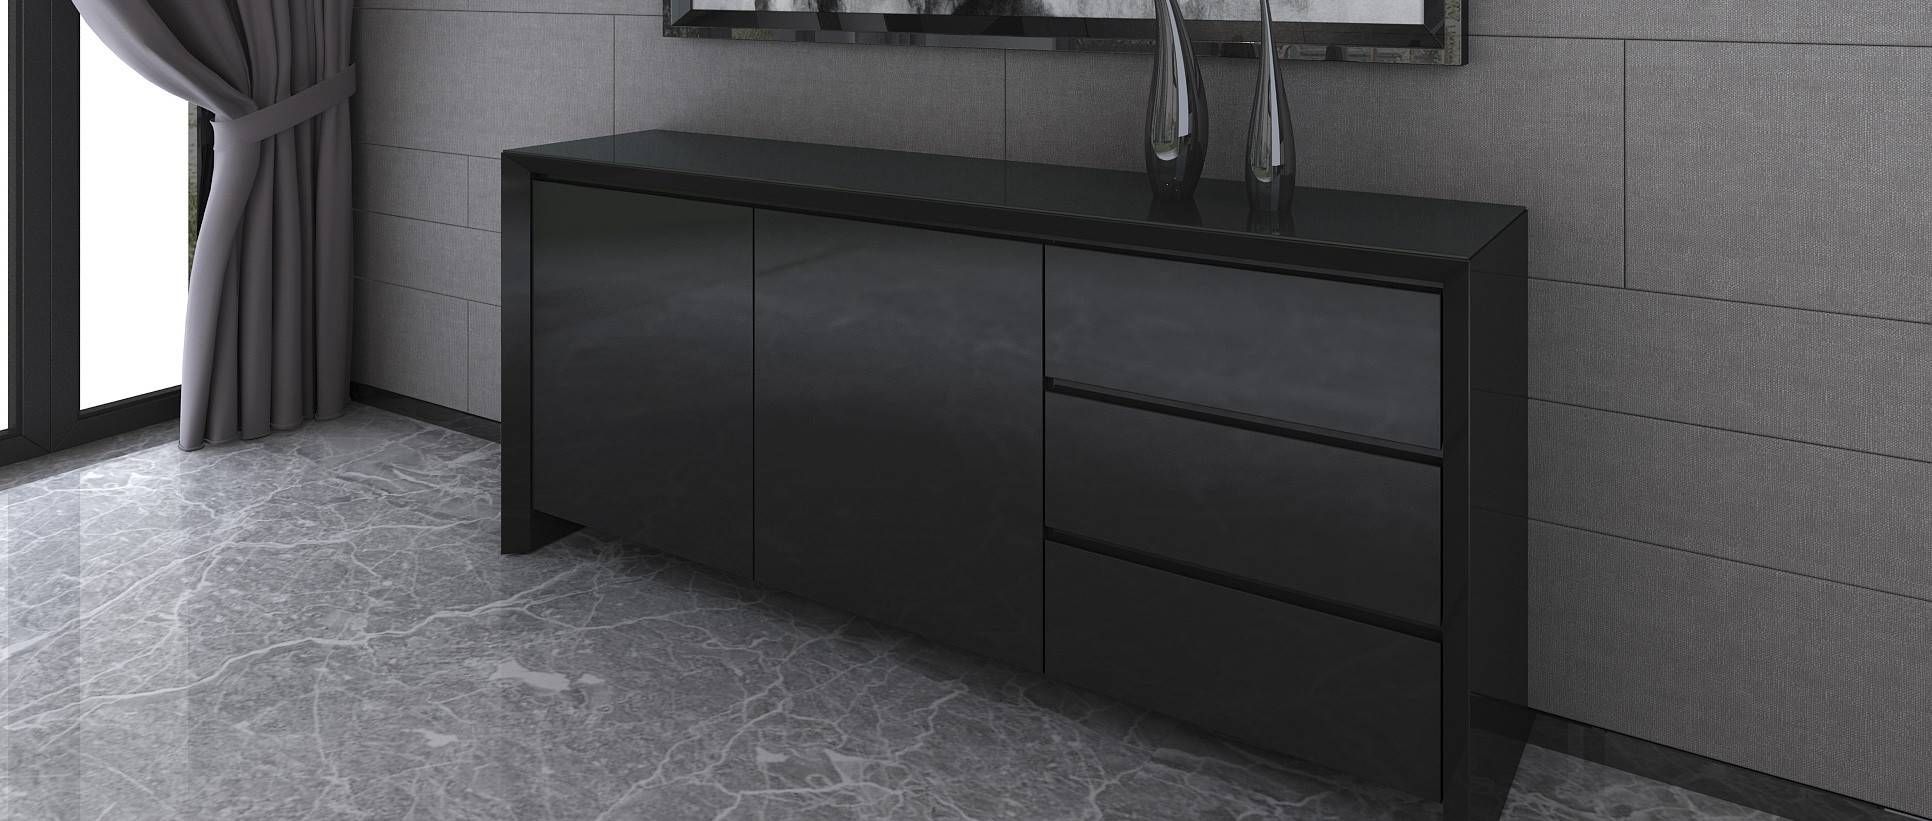 Soho – Extra Large Sideboard – Black High Gloss Pertaining To Black Gloss Sideboards (View 19 of 30)